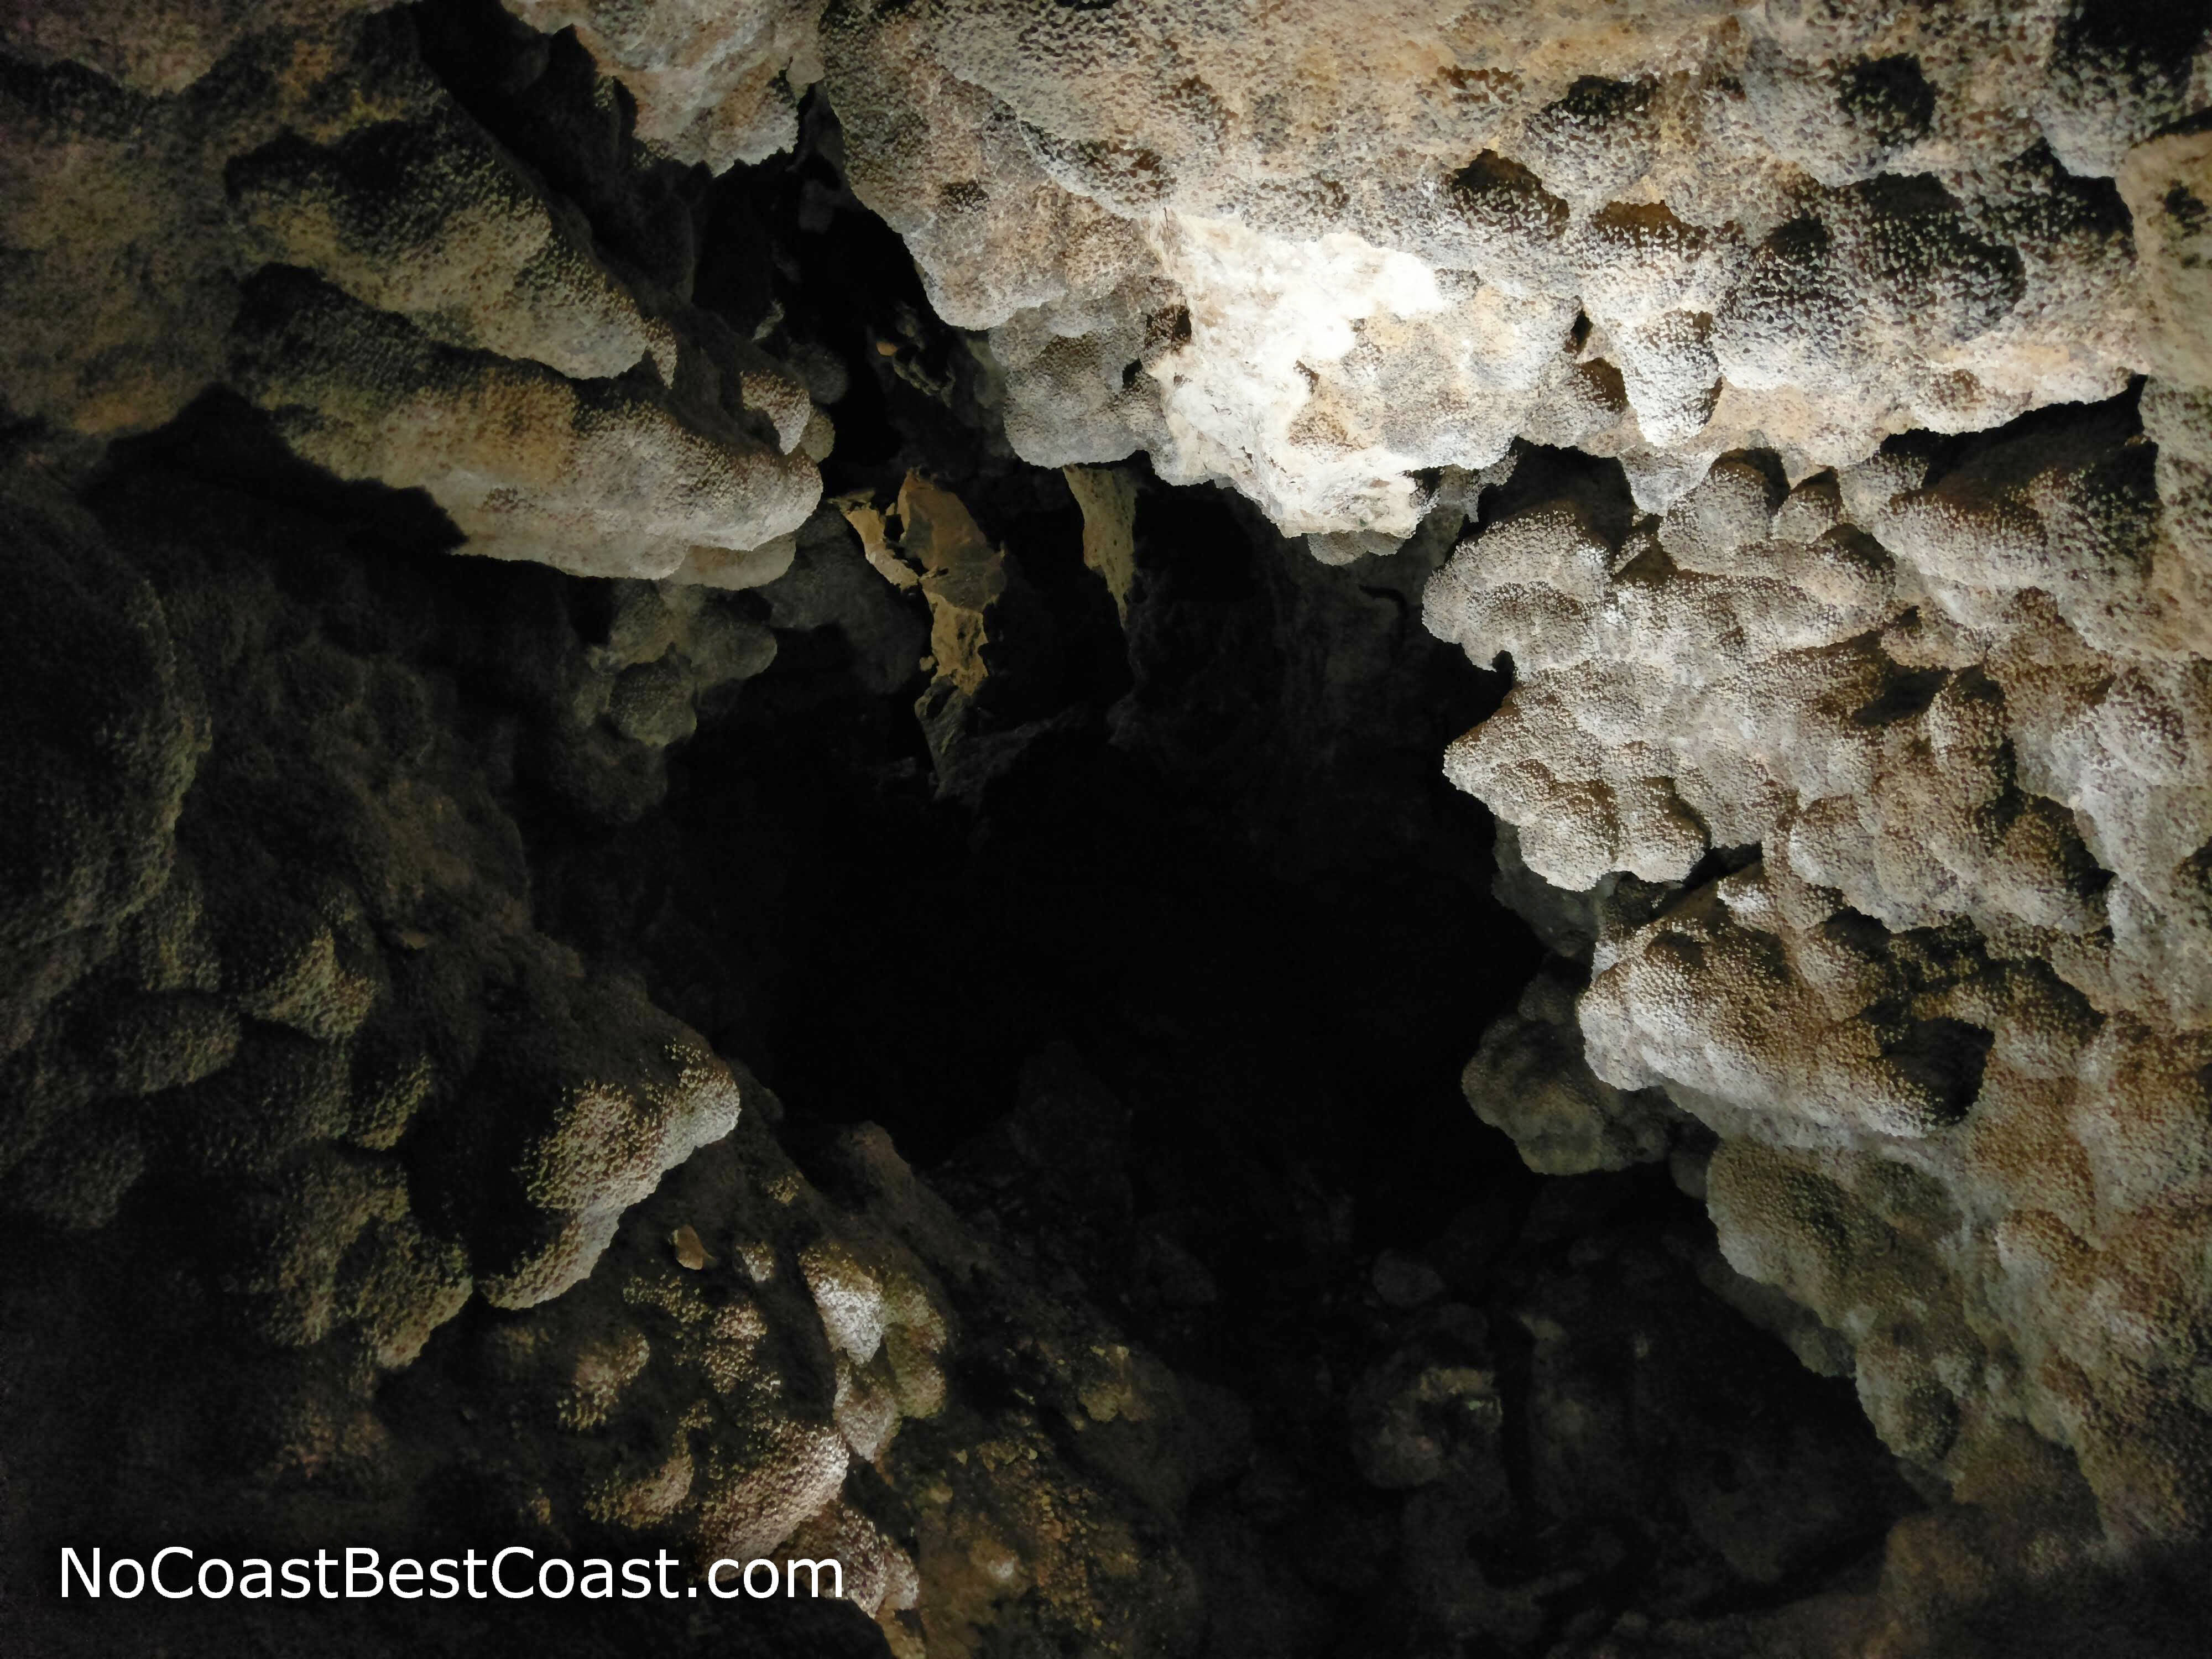 Many of the cave formations look like coral